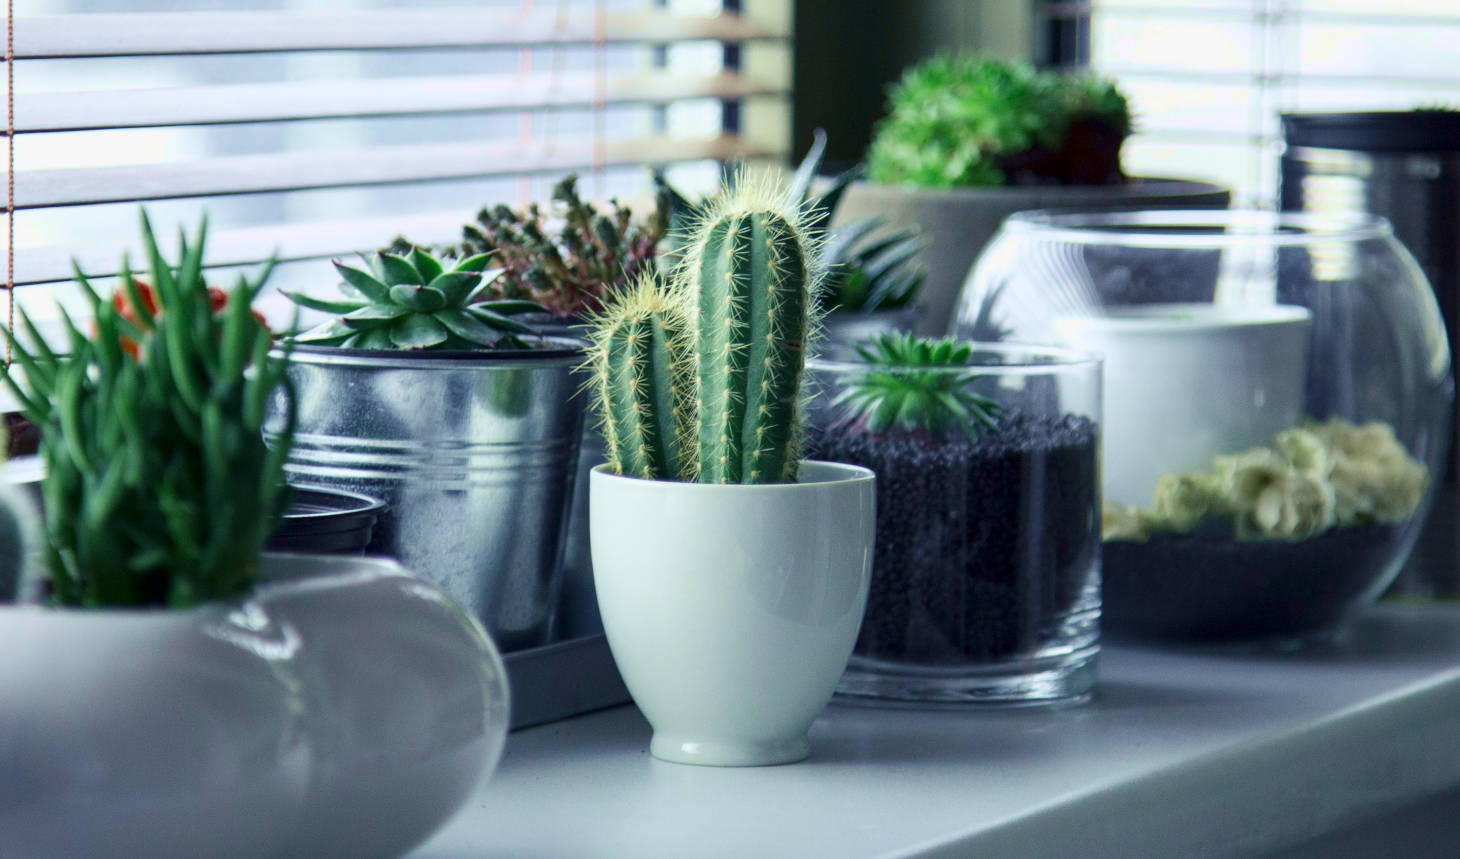 potted cactus together with other plants